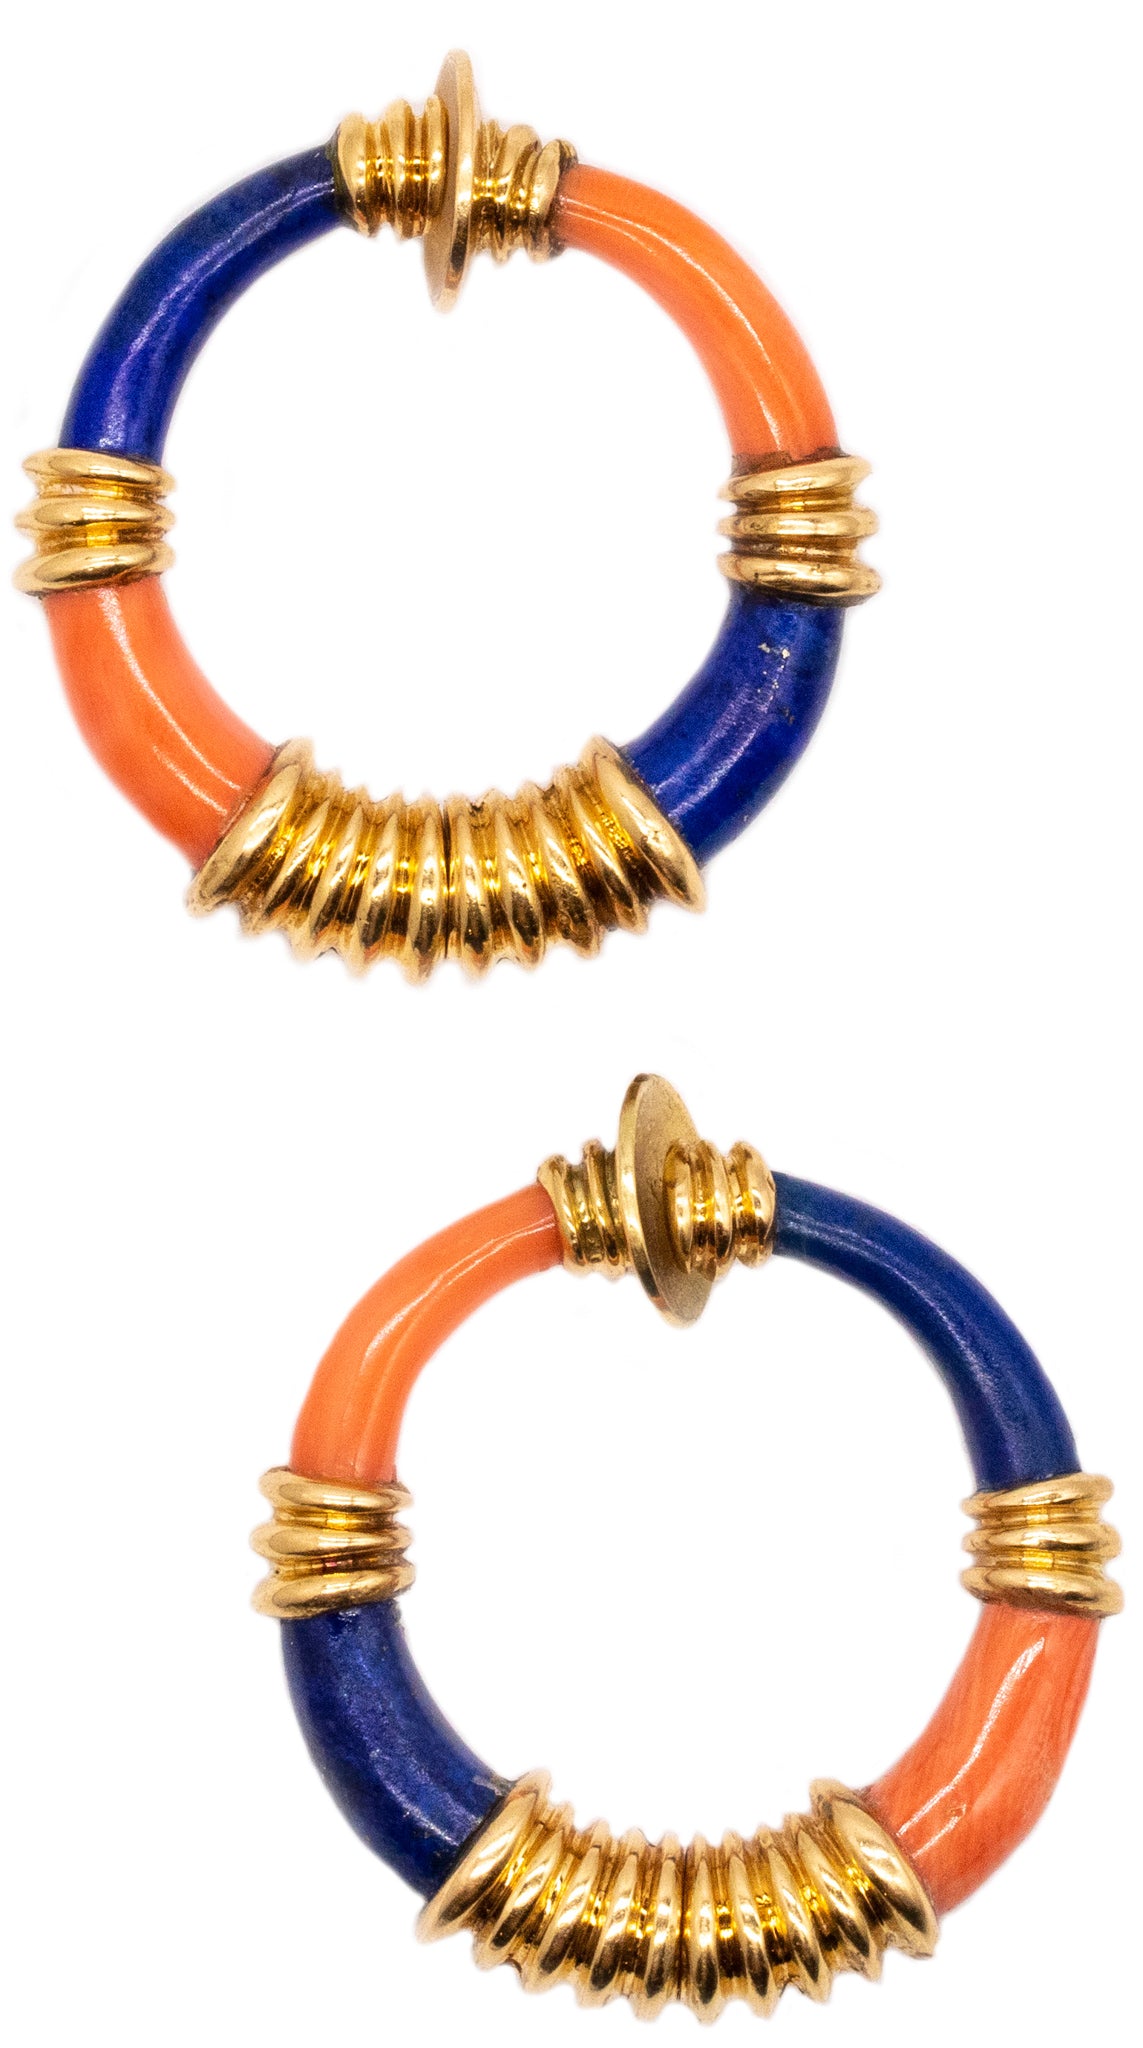 FRANCE 1970 PARIS 18 KT YELLOW GOLD HOOPS EARRINGS WITH CORAL & LAPIS LAZULI